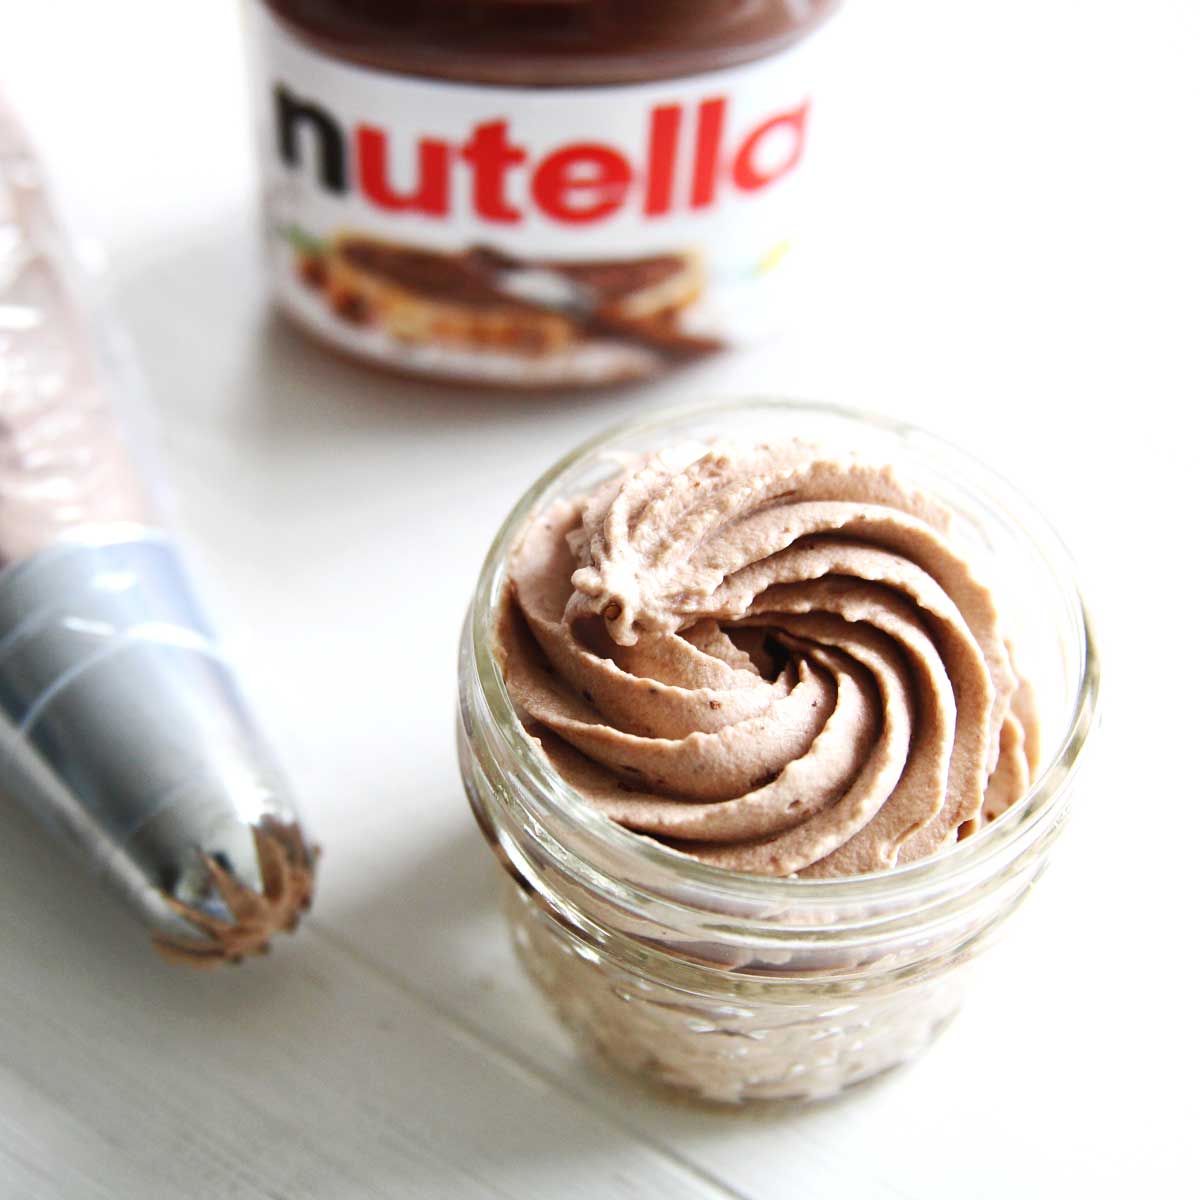 How to Make Nutella Chocolate Whipped Cream (Chantilly Cream) - Whipped Cream Recipes